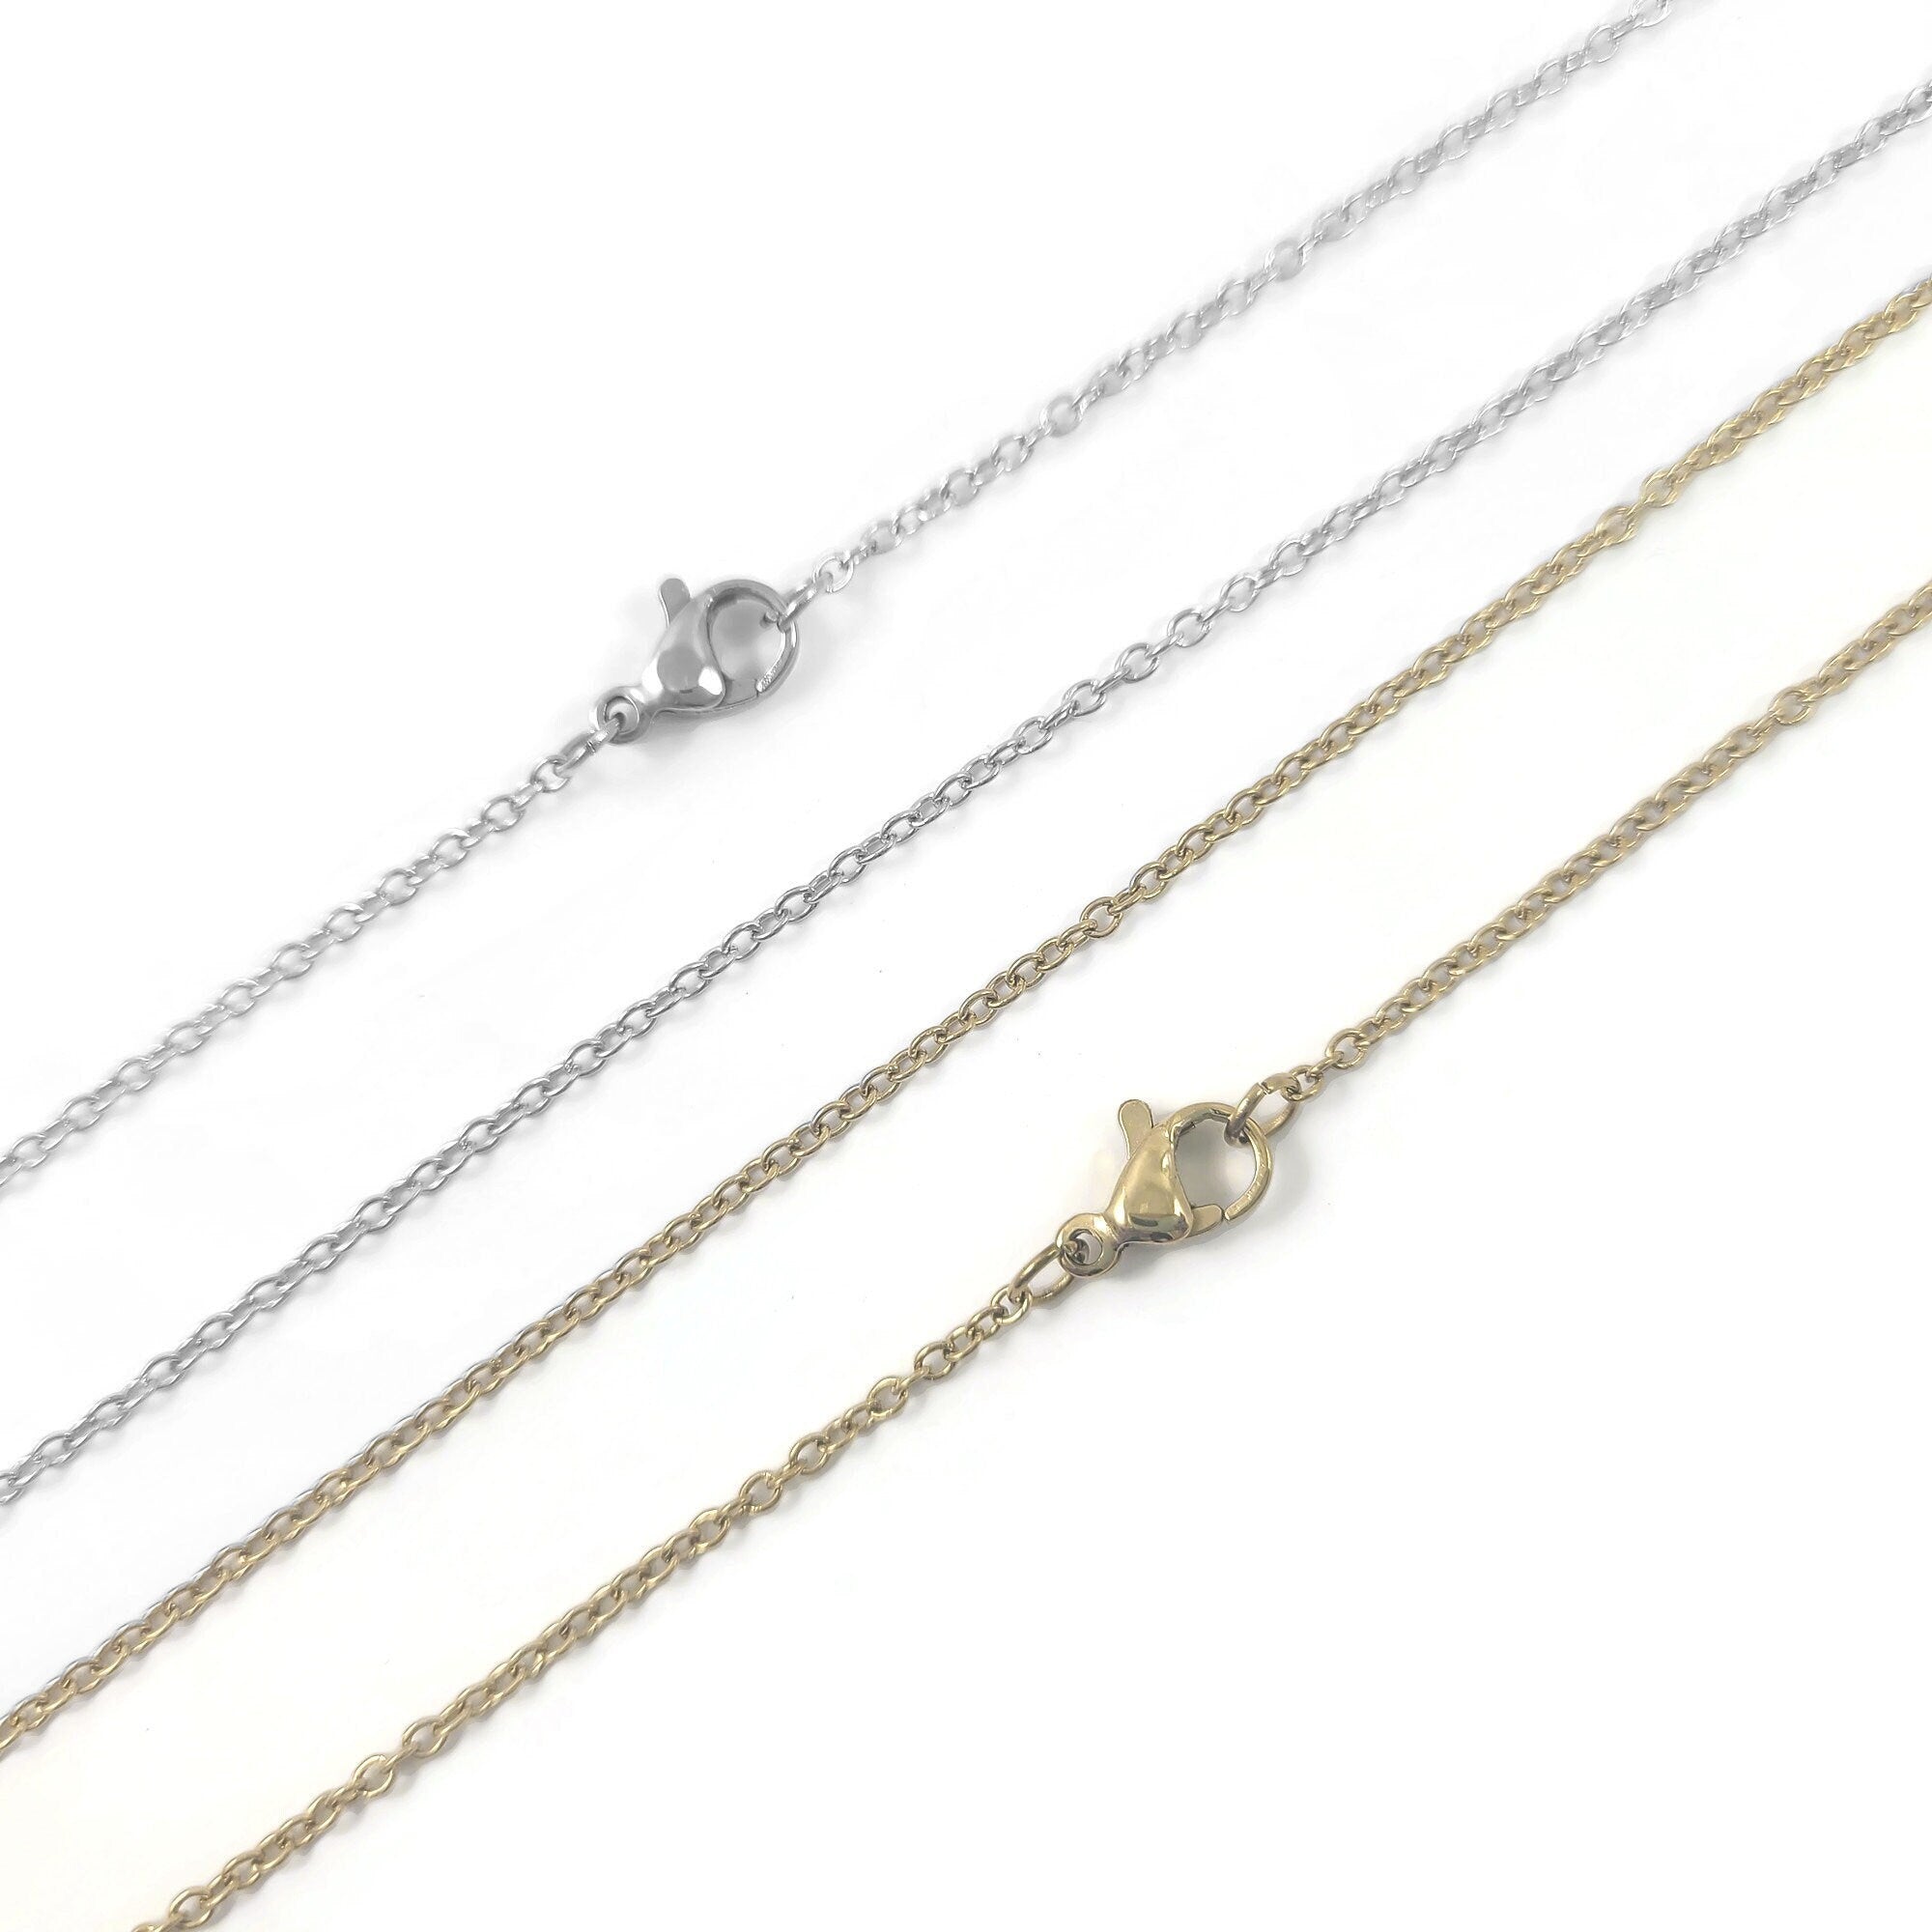 Necklace Chain Jewelry Making Gold Plated